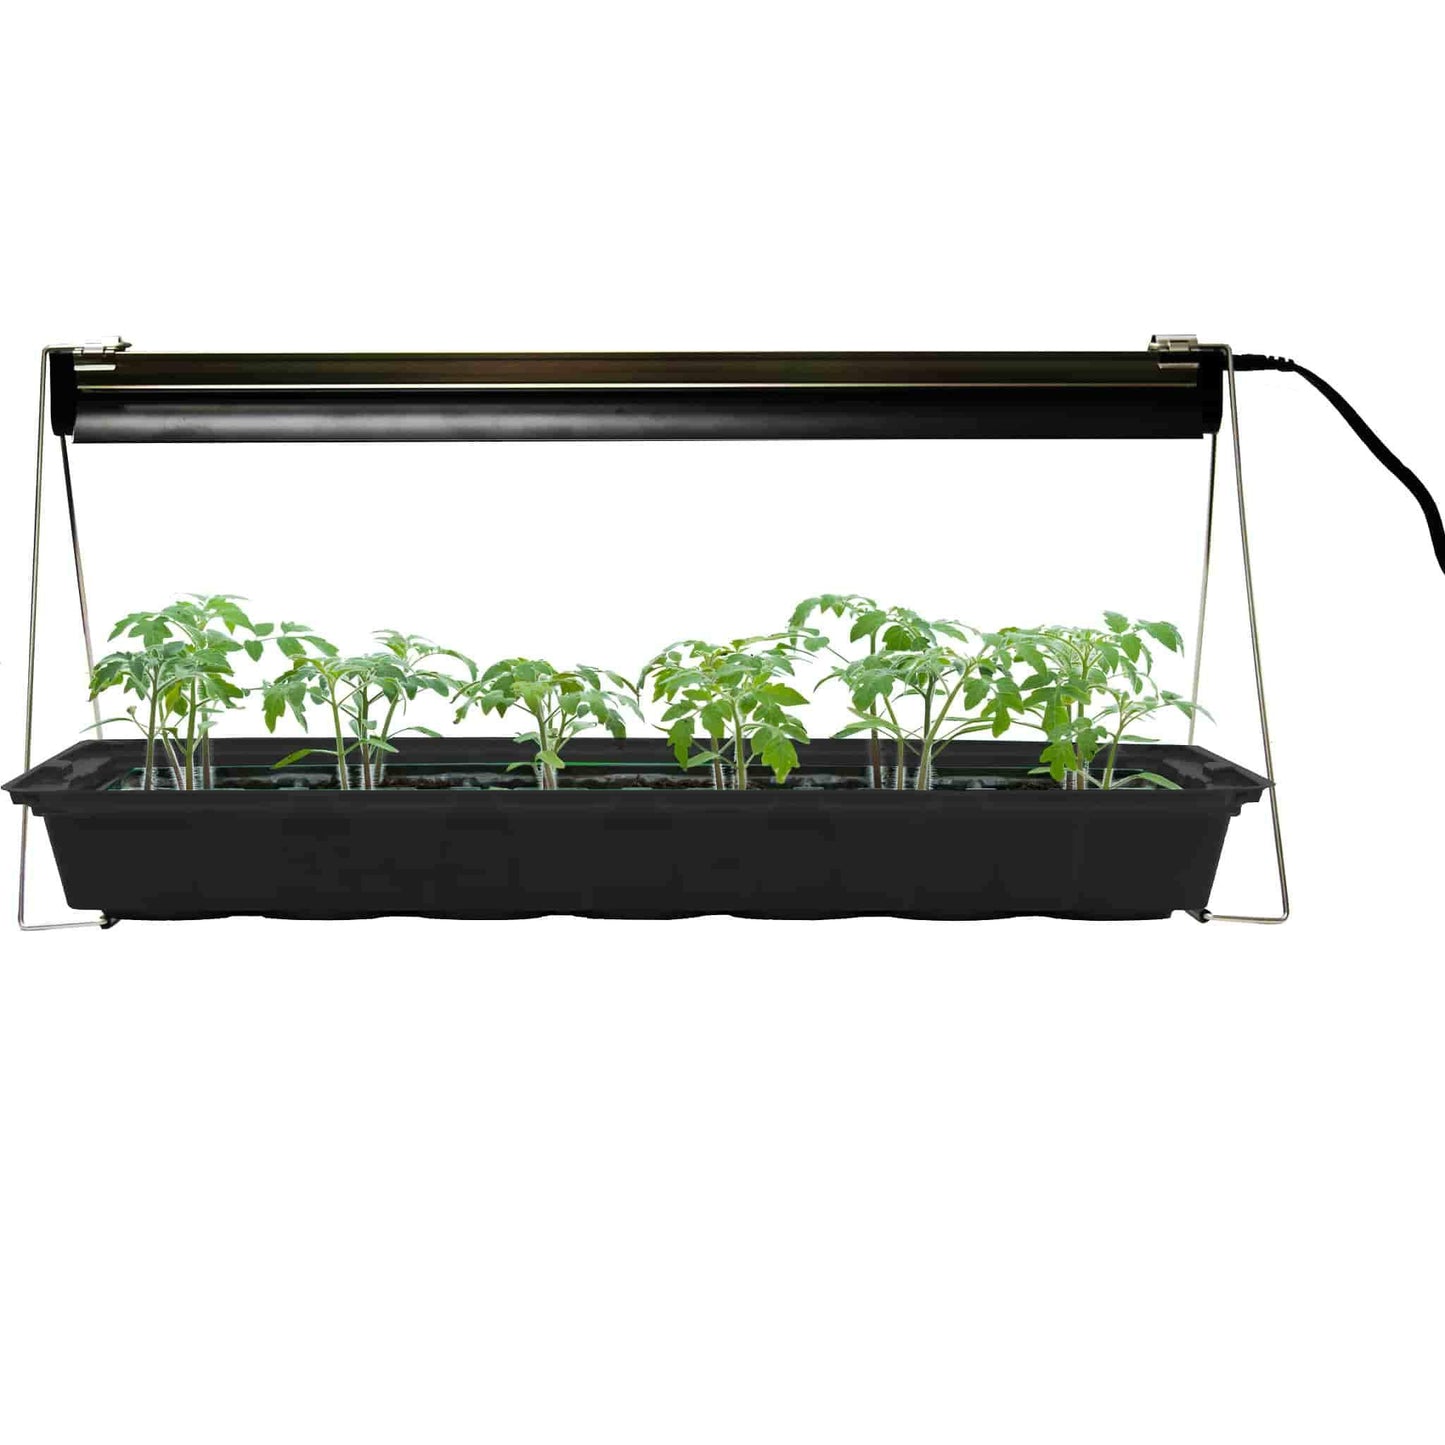 Ferry-Morse Grow Light With Seedlings